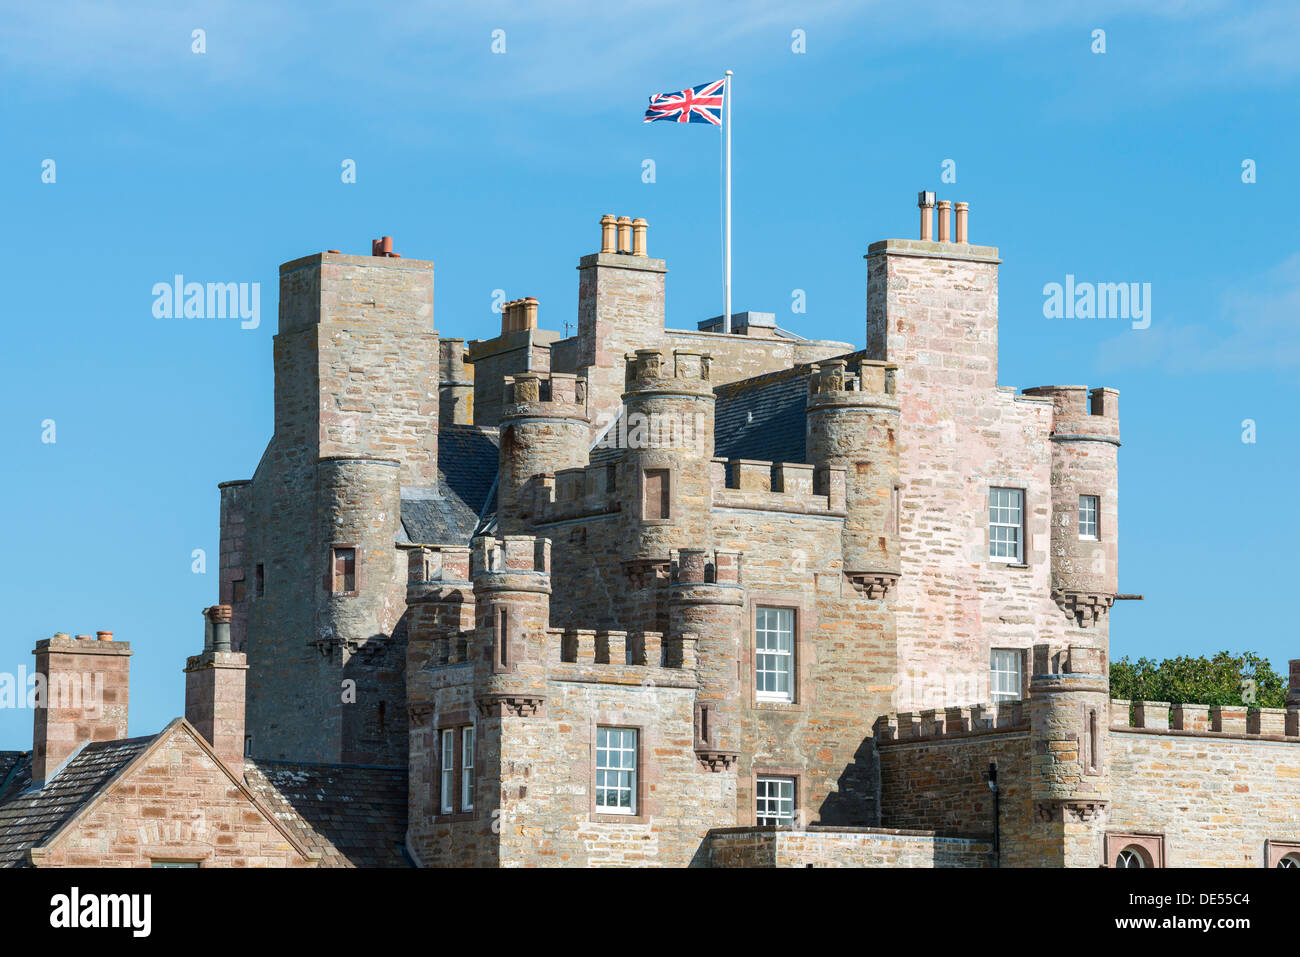 Castle of Mey, formerly Barrogill Castle, former residence of the Queen Mother, Caithness, Scotland, United Kingdom, Europe Stock Photo